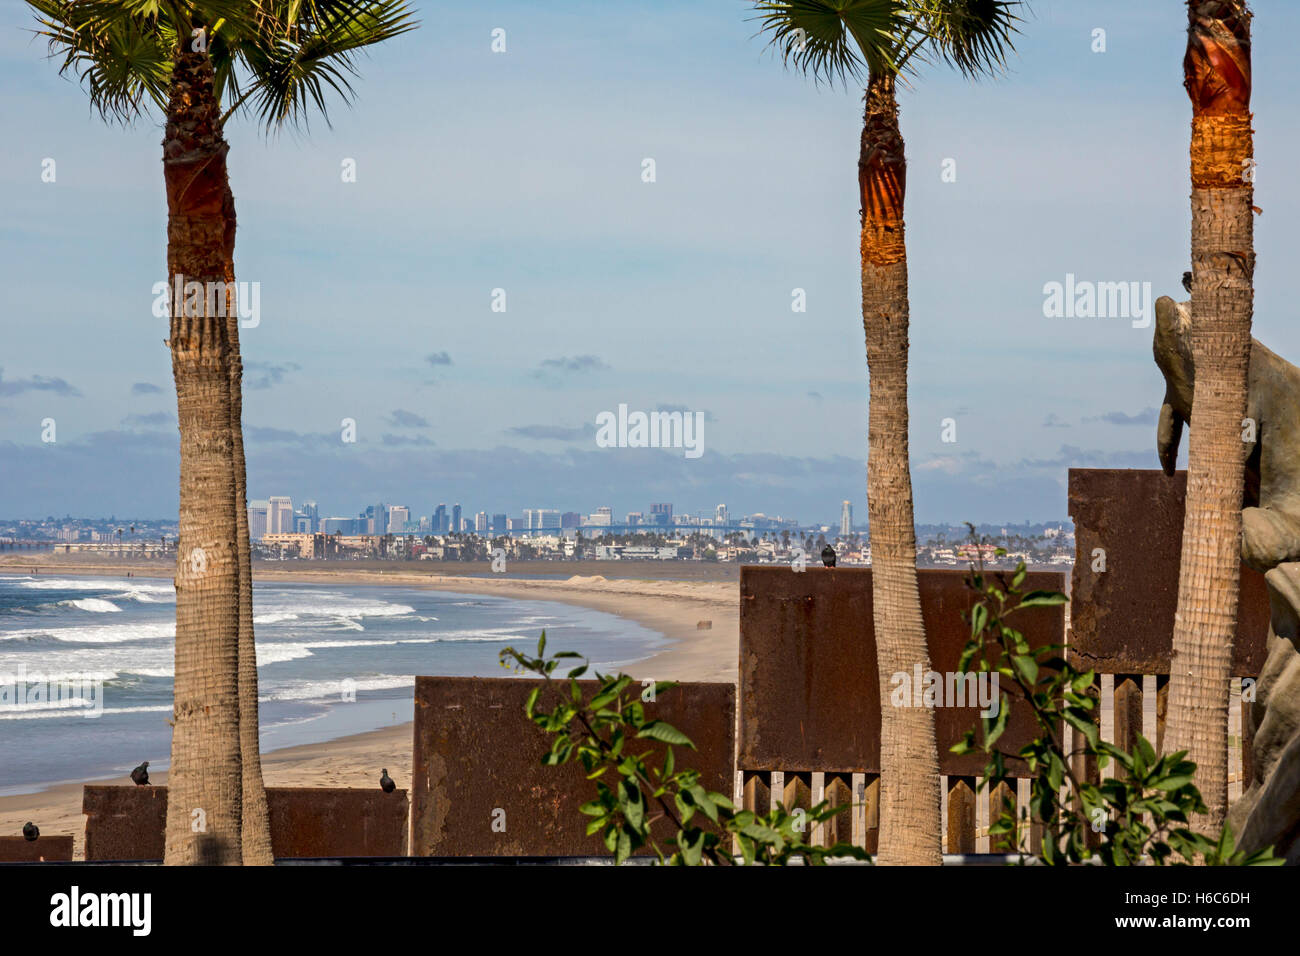 Tijuana, Mexico - The U.S.-Mexico border fence where it meets the Pacific Ocean. San Diego, California is up the beach. Stock Photo